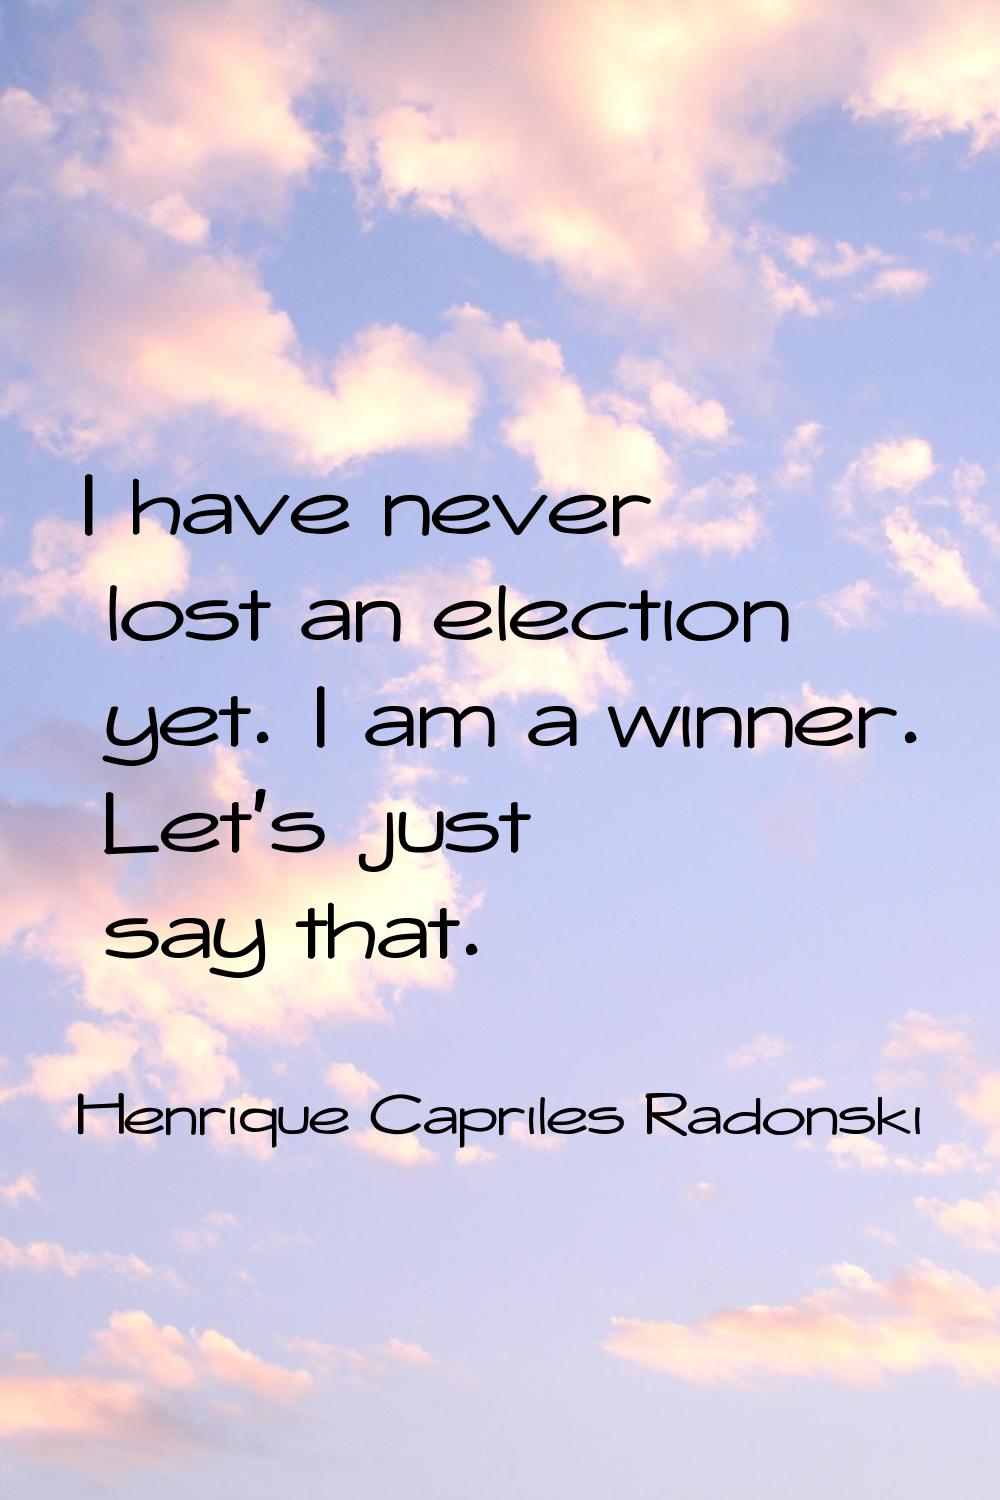 I have never lost an election yet. I am a winner. Let's just say that.